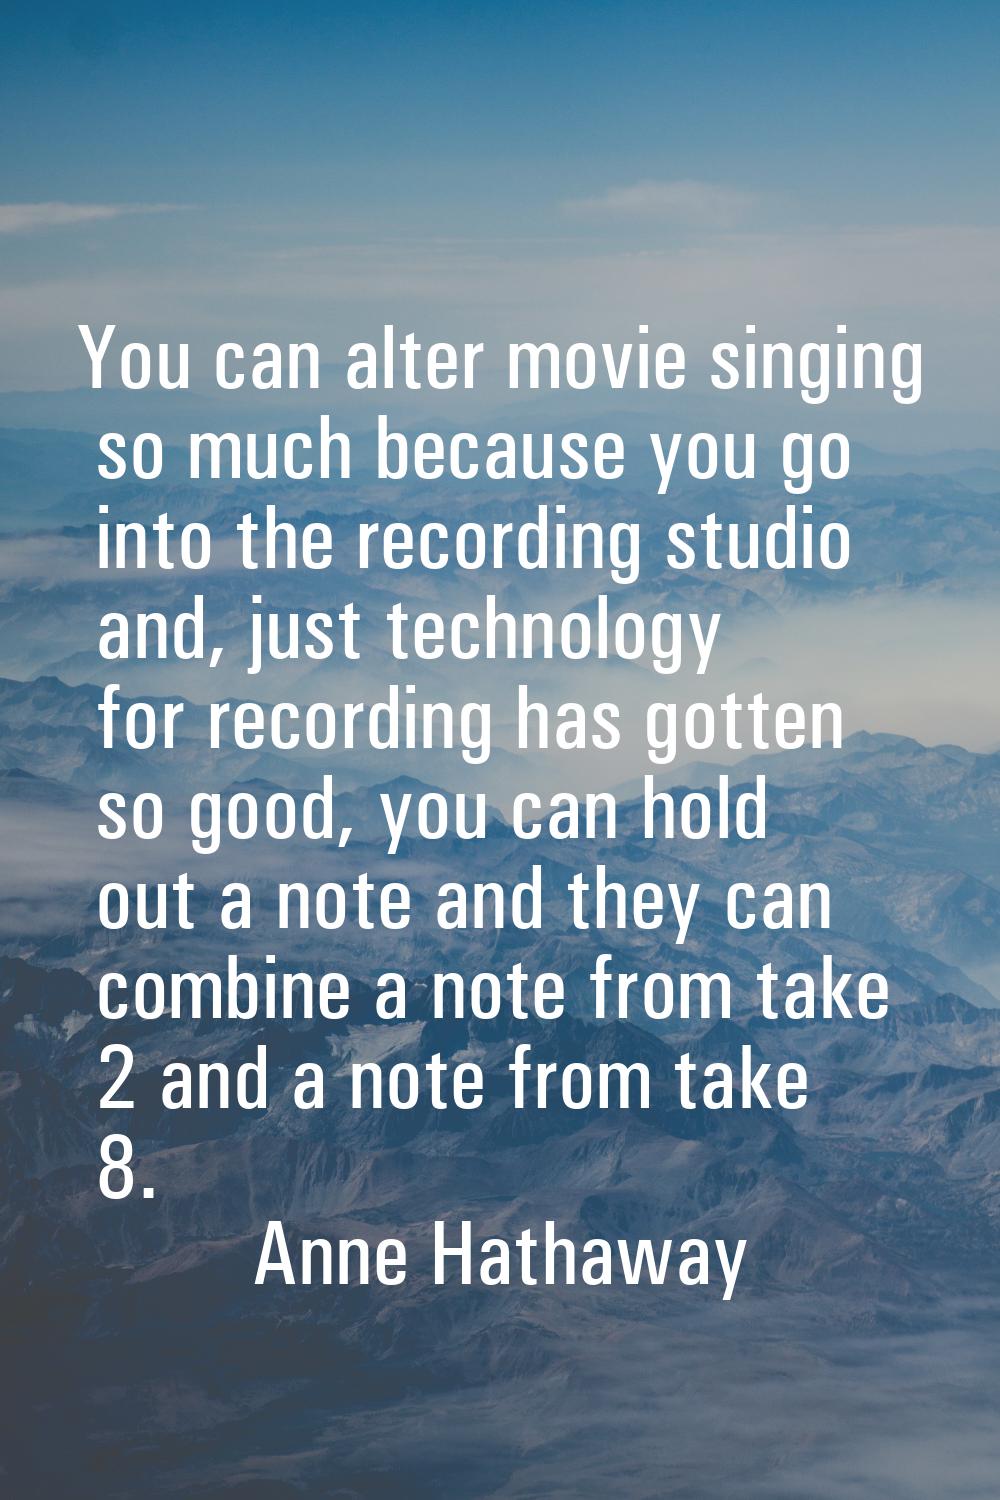 You can alter movie singing so much because you go into the recording studio and, just technology f